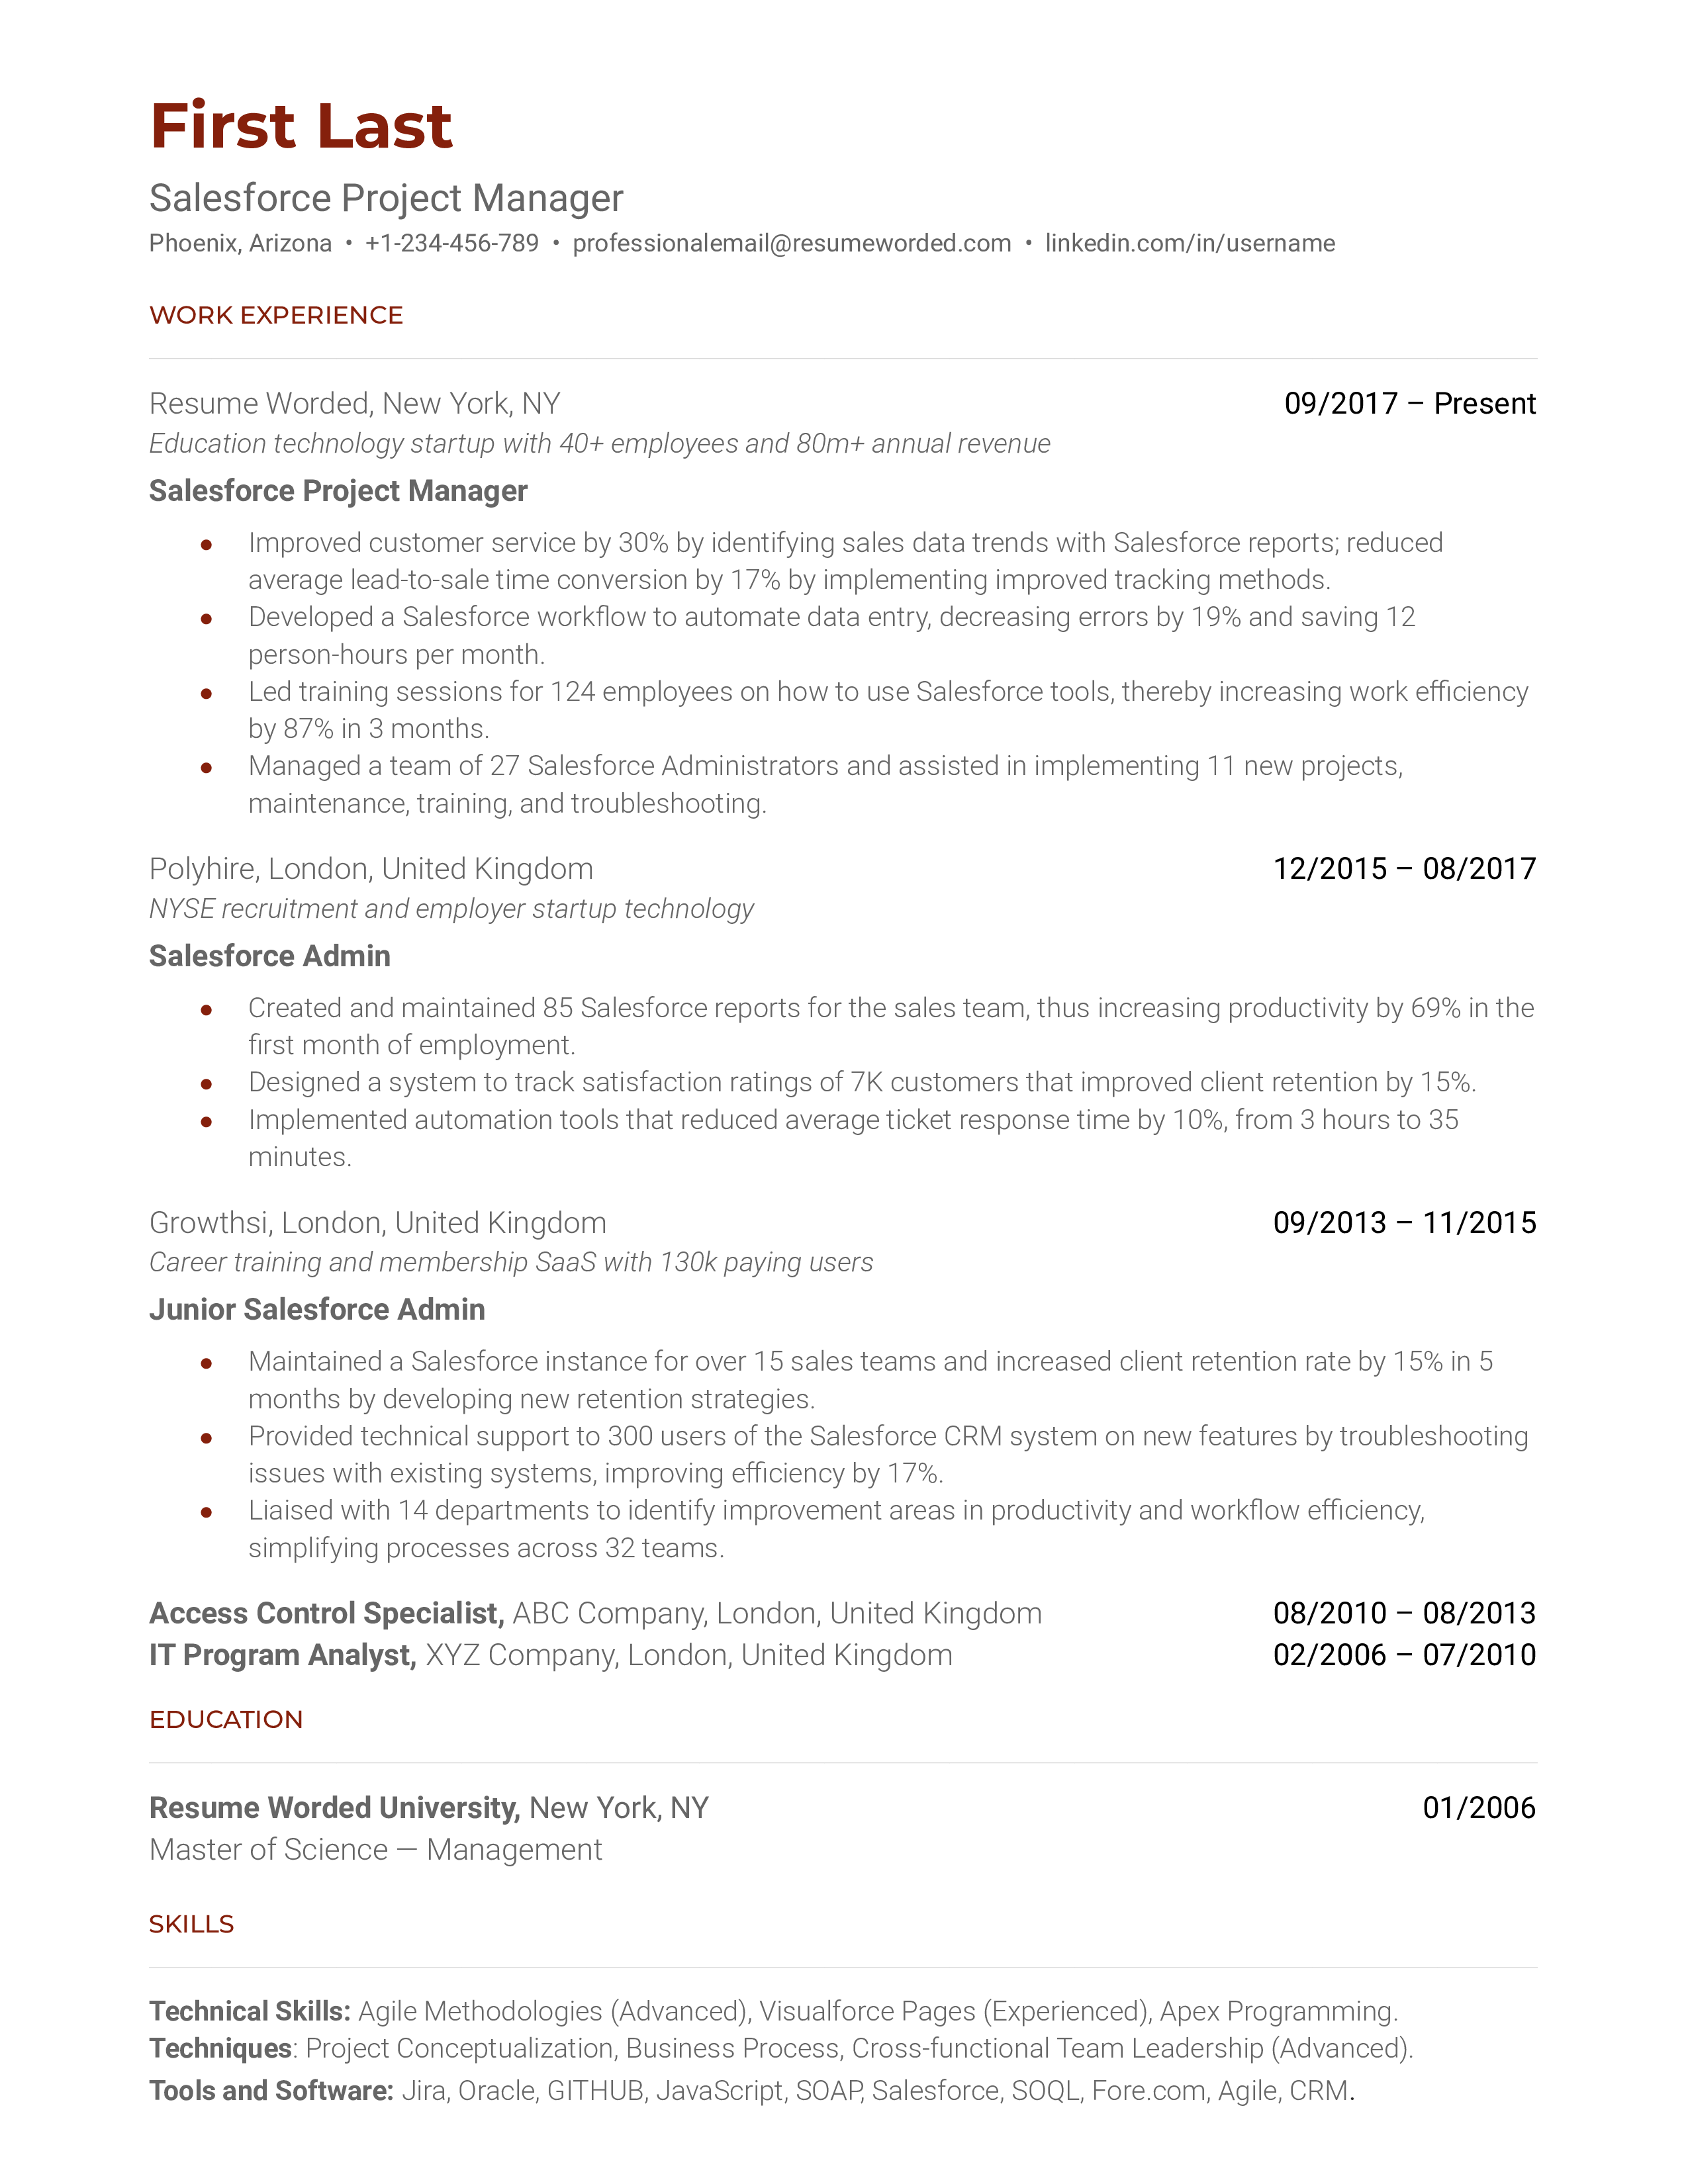 A Salesforce project manager resume with a MS in management and experience in Salesforce adminstration.